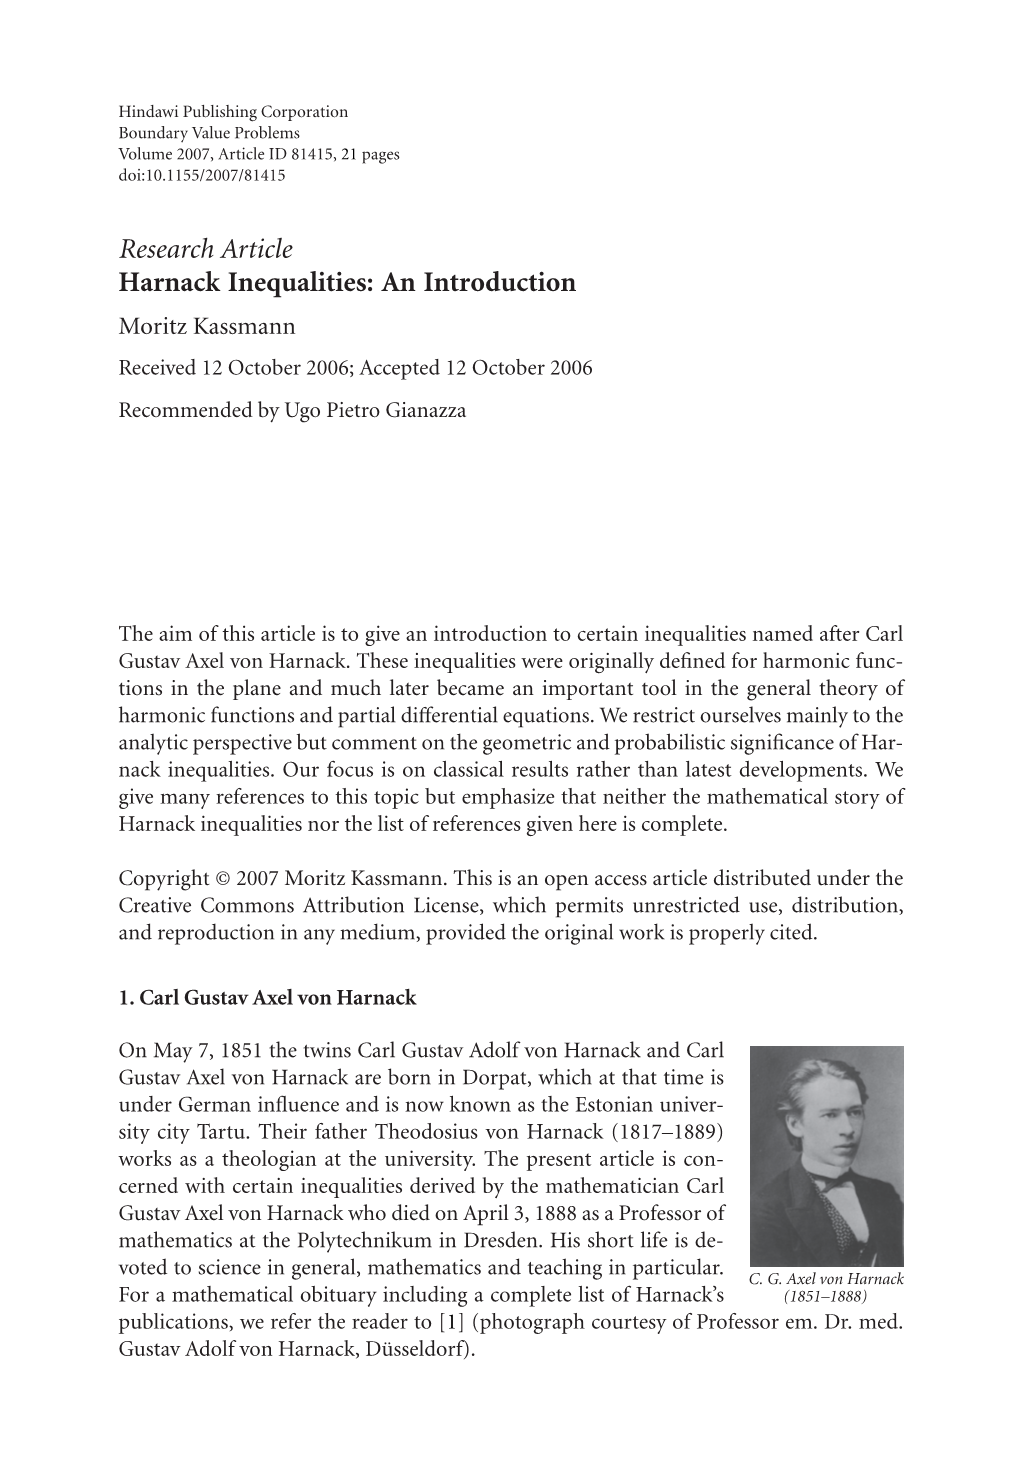 Harnack Inequalities: an Introduction Moritz Kassmann Received 12 October 2006; Accepted 12 October 2006 Recommended by Ugo Pietro Gianazza